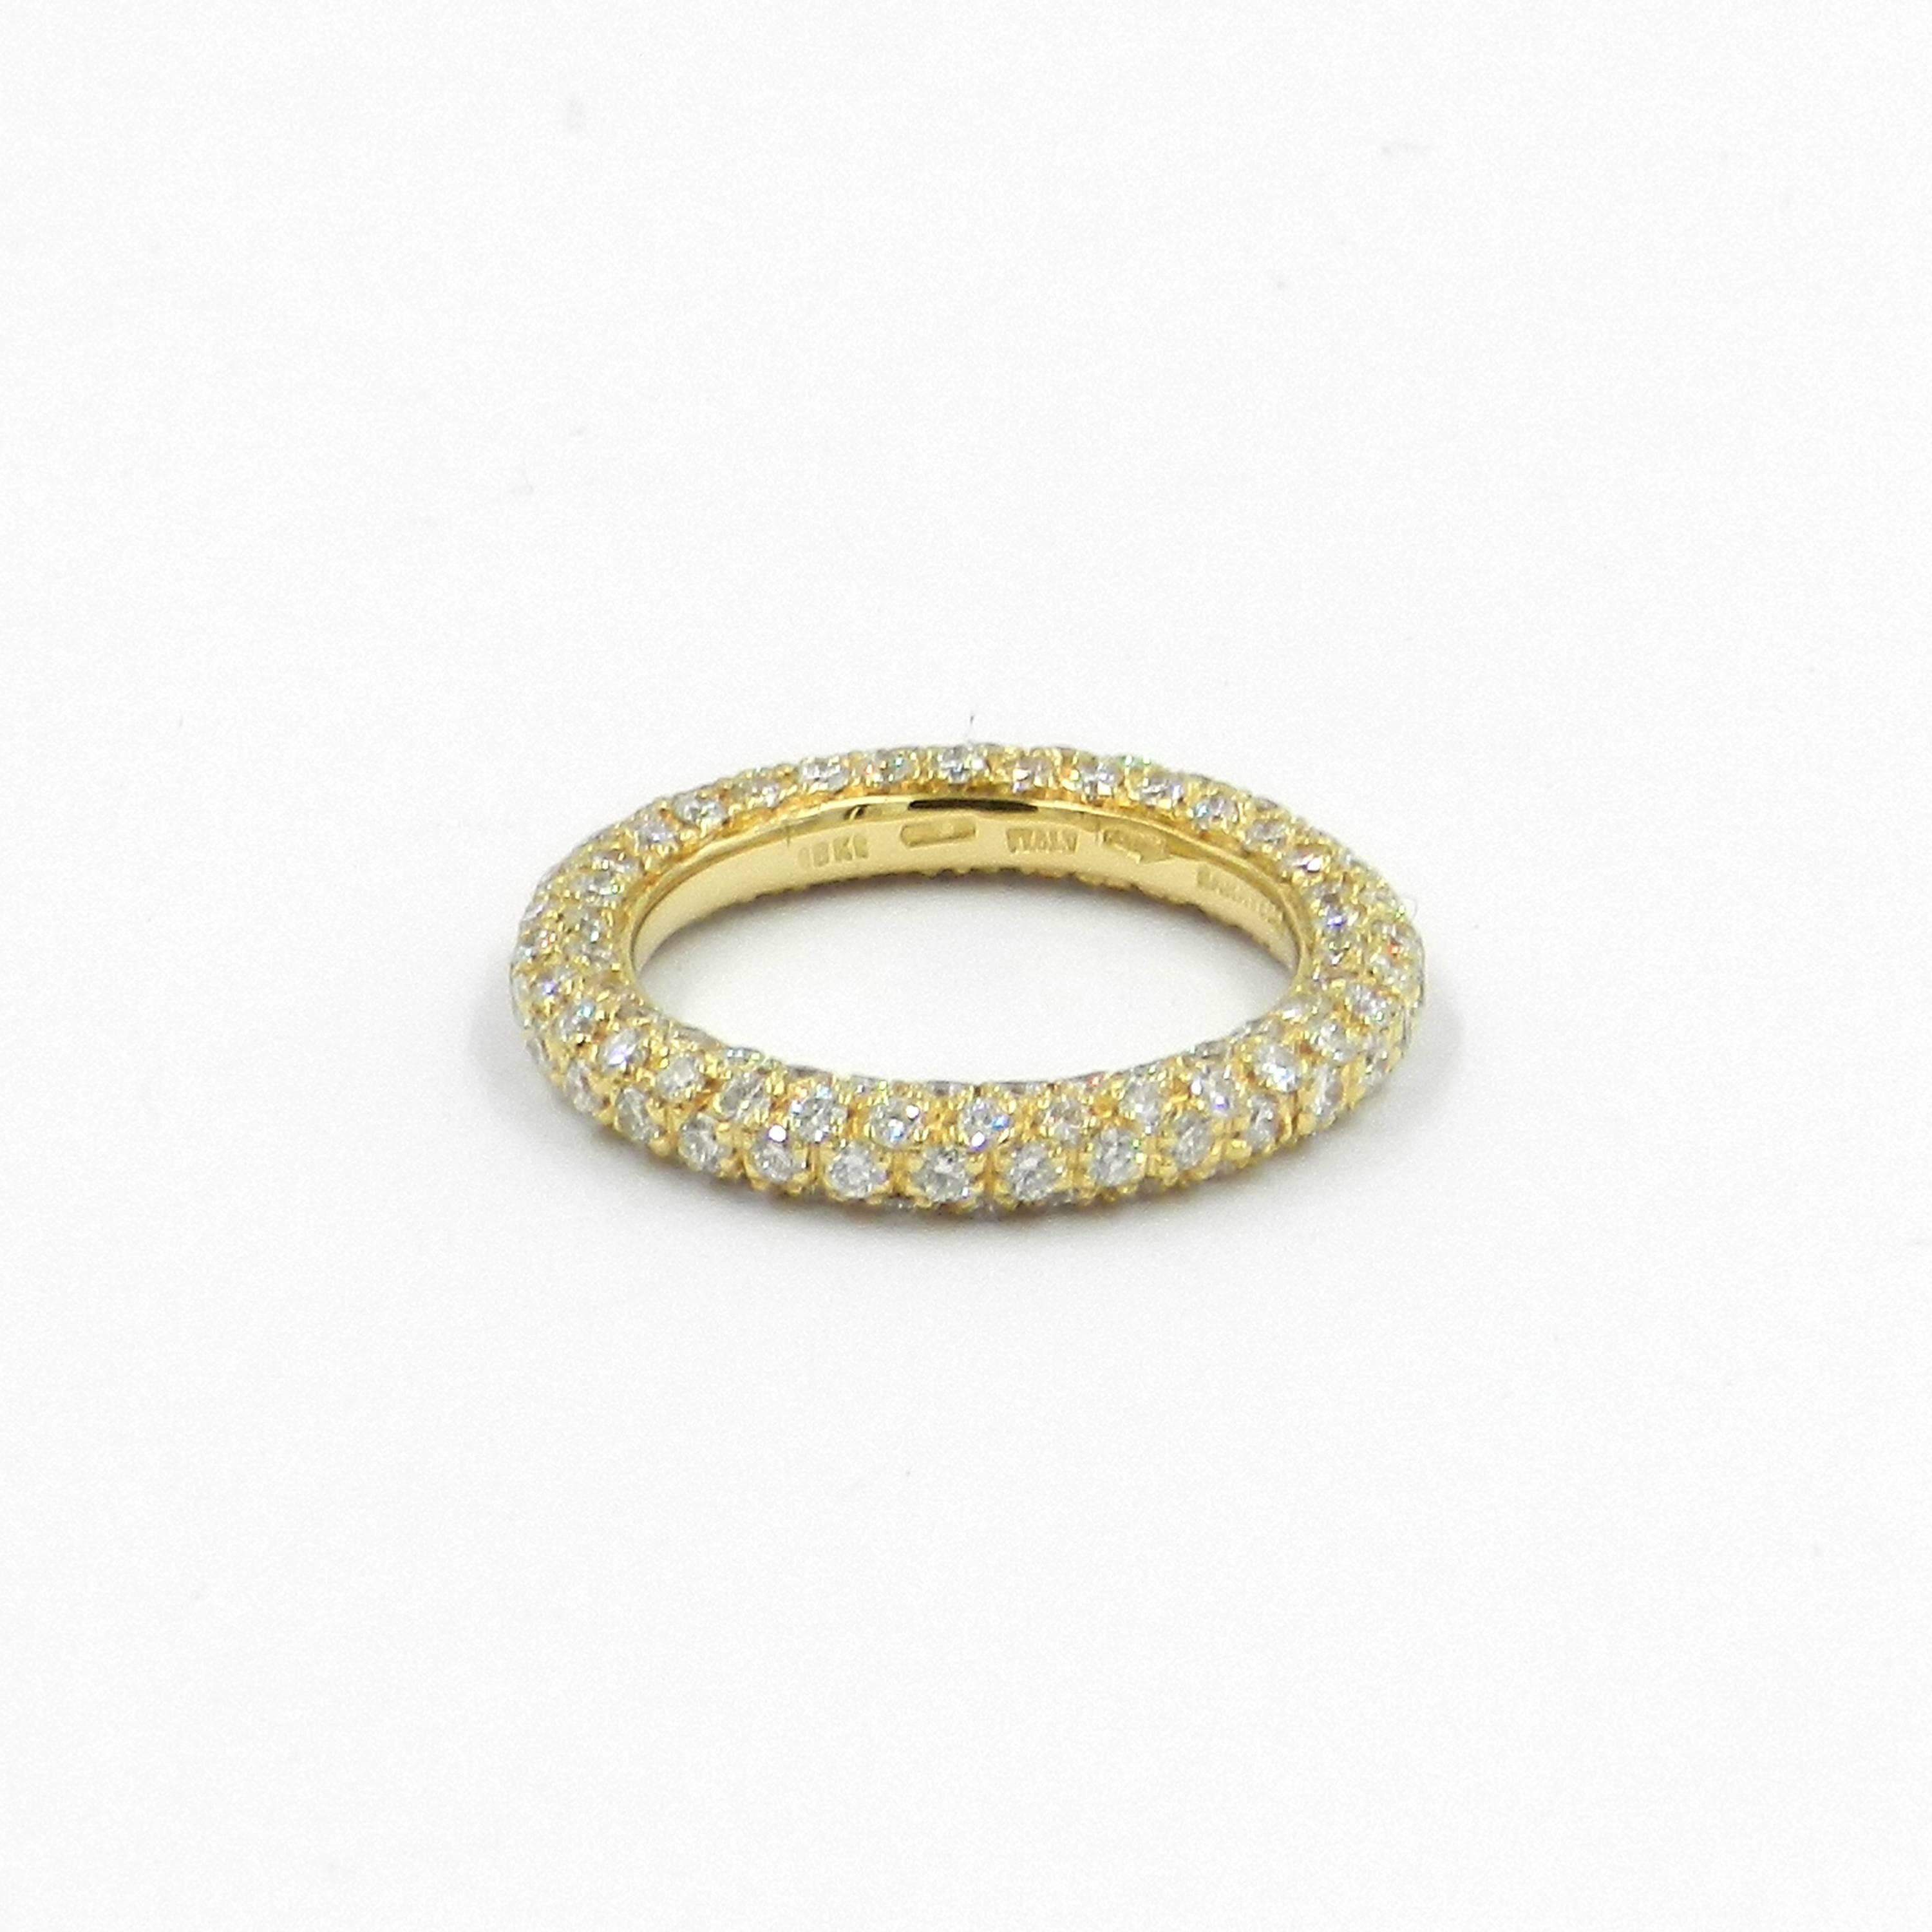 18Kt Yellow Gold  Classic Eternal Pavè Band Ring from GARAVELLI ETERNITY Masterpiece Collection
Finger size 51, US 5.5
ring thinkness mm 3, ring band height 2.5mm
18kt Yellow GOLD gr : 5,00
WHITE DIAMONDS ct : 2,05